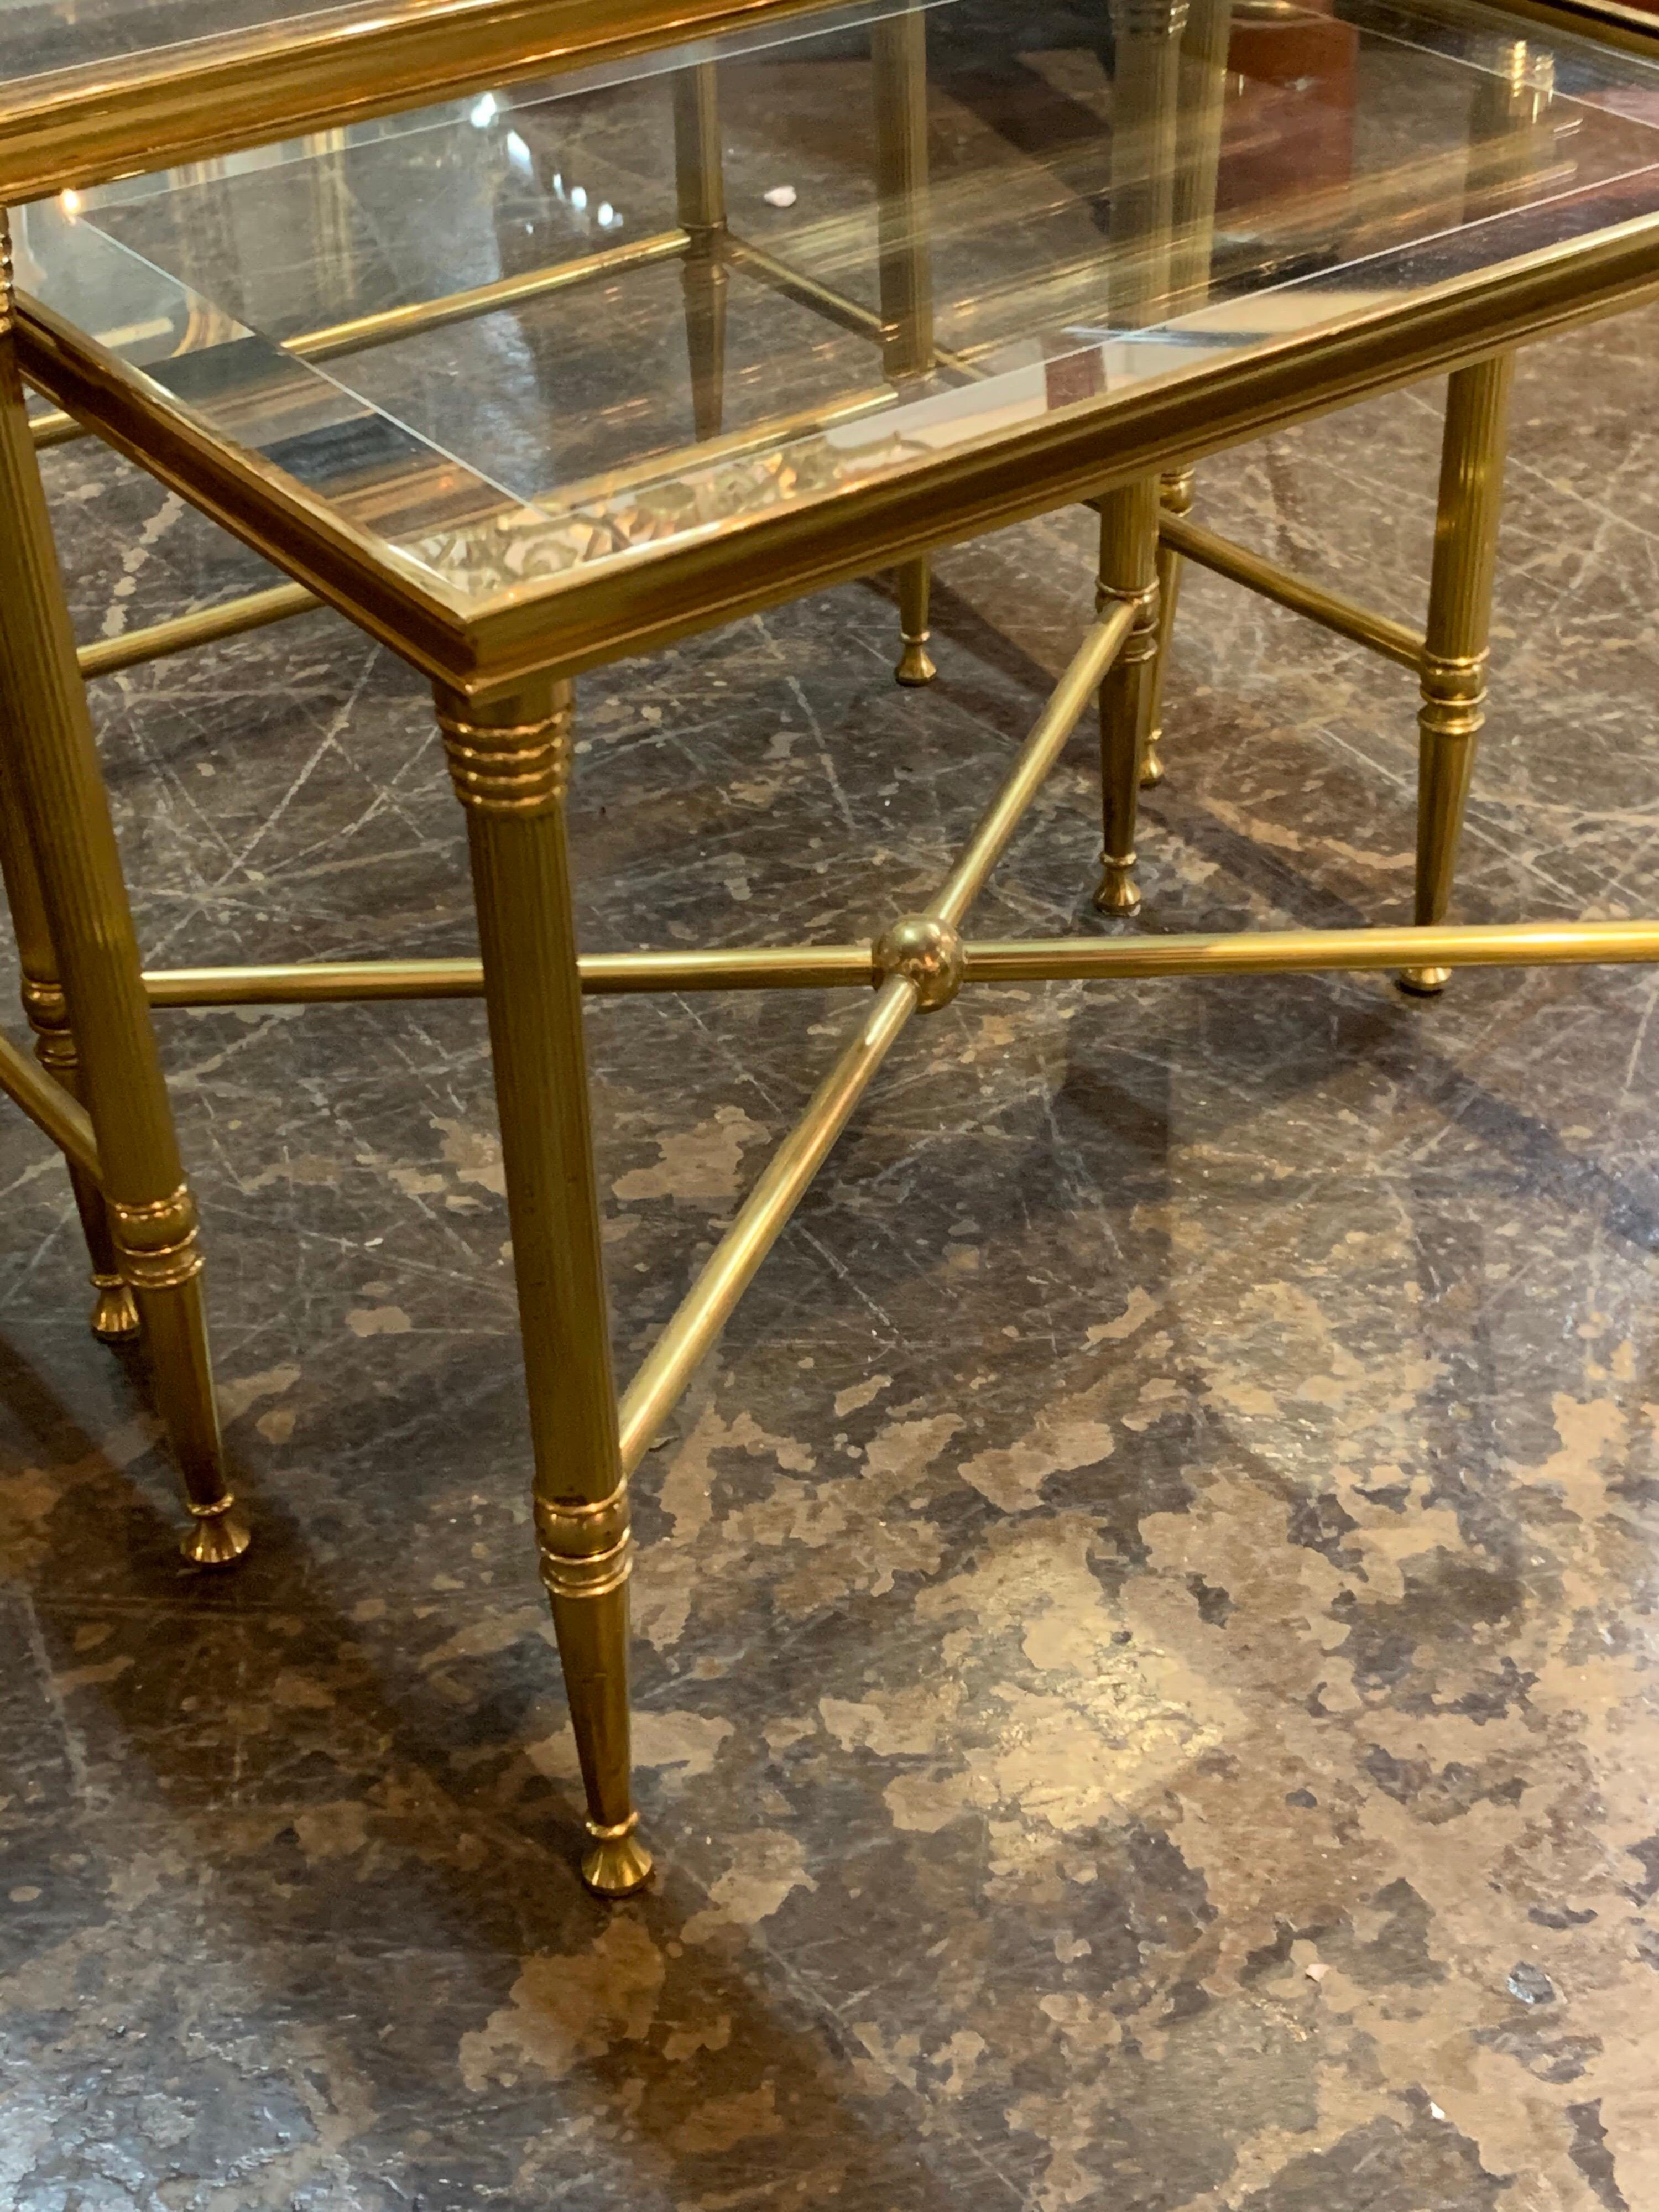 Lovely set of brass and glass top nesting tables. There is mirrored glass on the outside edges of the glass top and nice details on the brass bases. A very pretty Classic look!
        